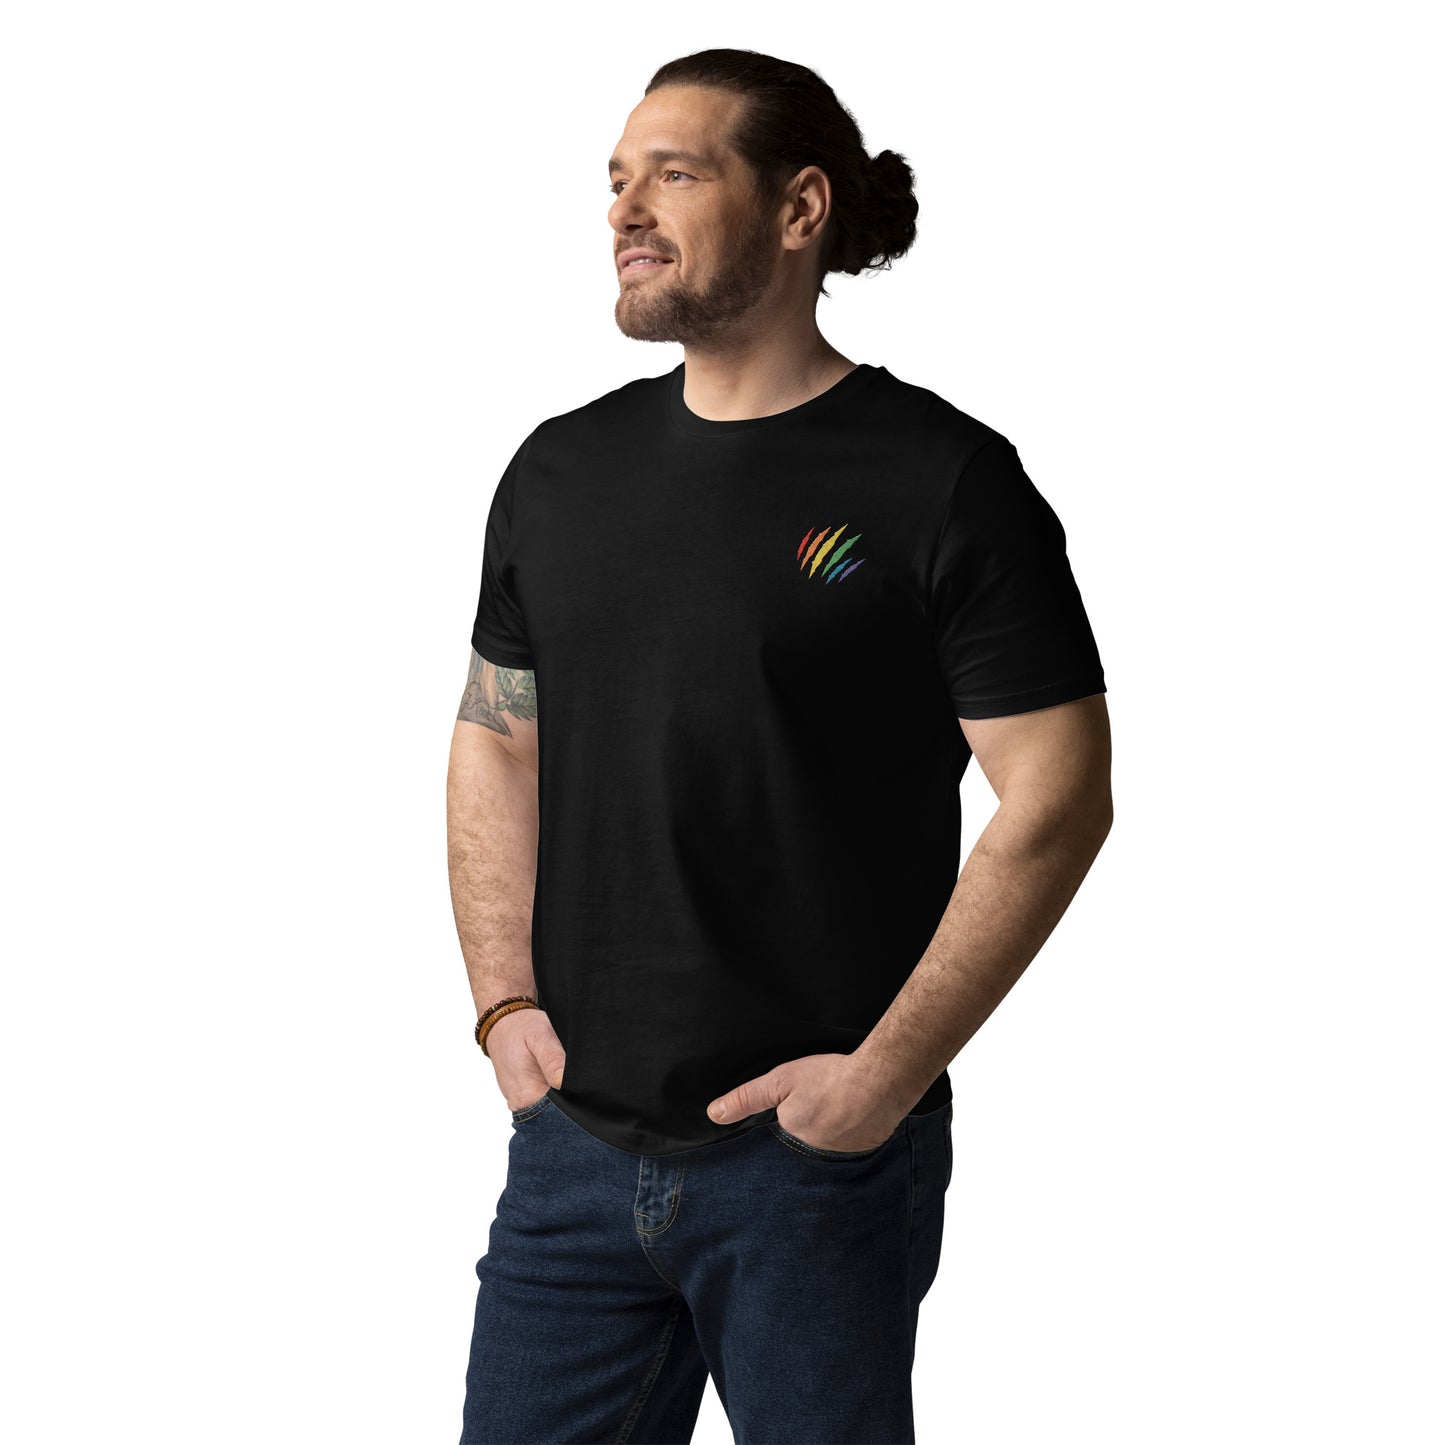 Male model wearing a fitted black organic cotton t-shirt with an embroidered scratch in the rainbow colors on the left chest. Available in sizes S to 3XL.